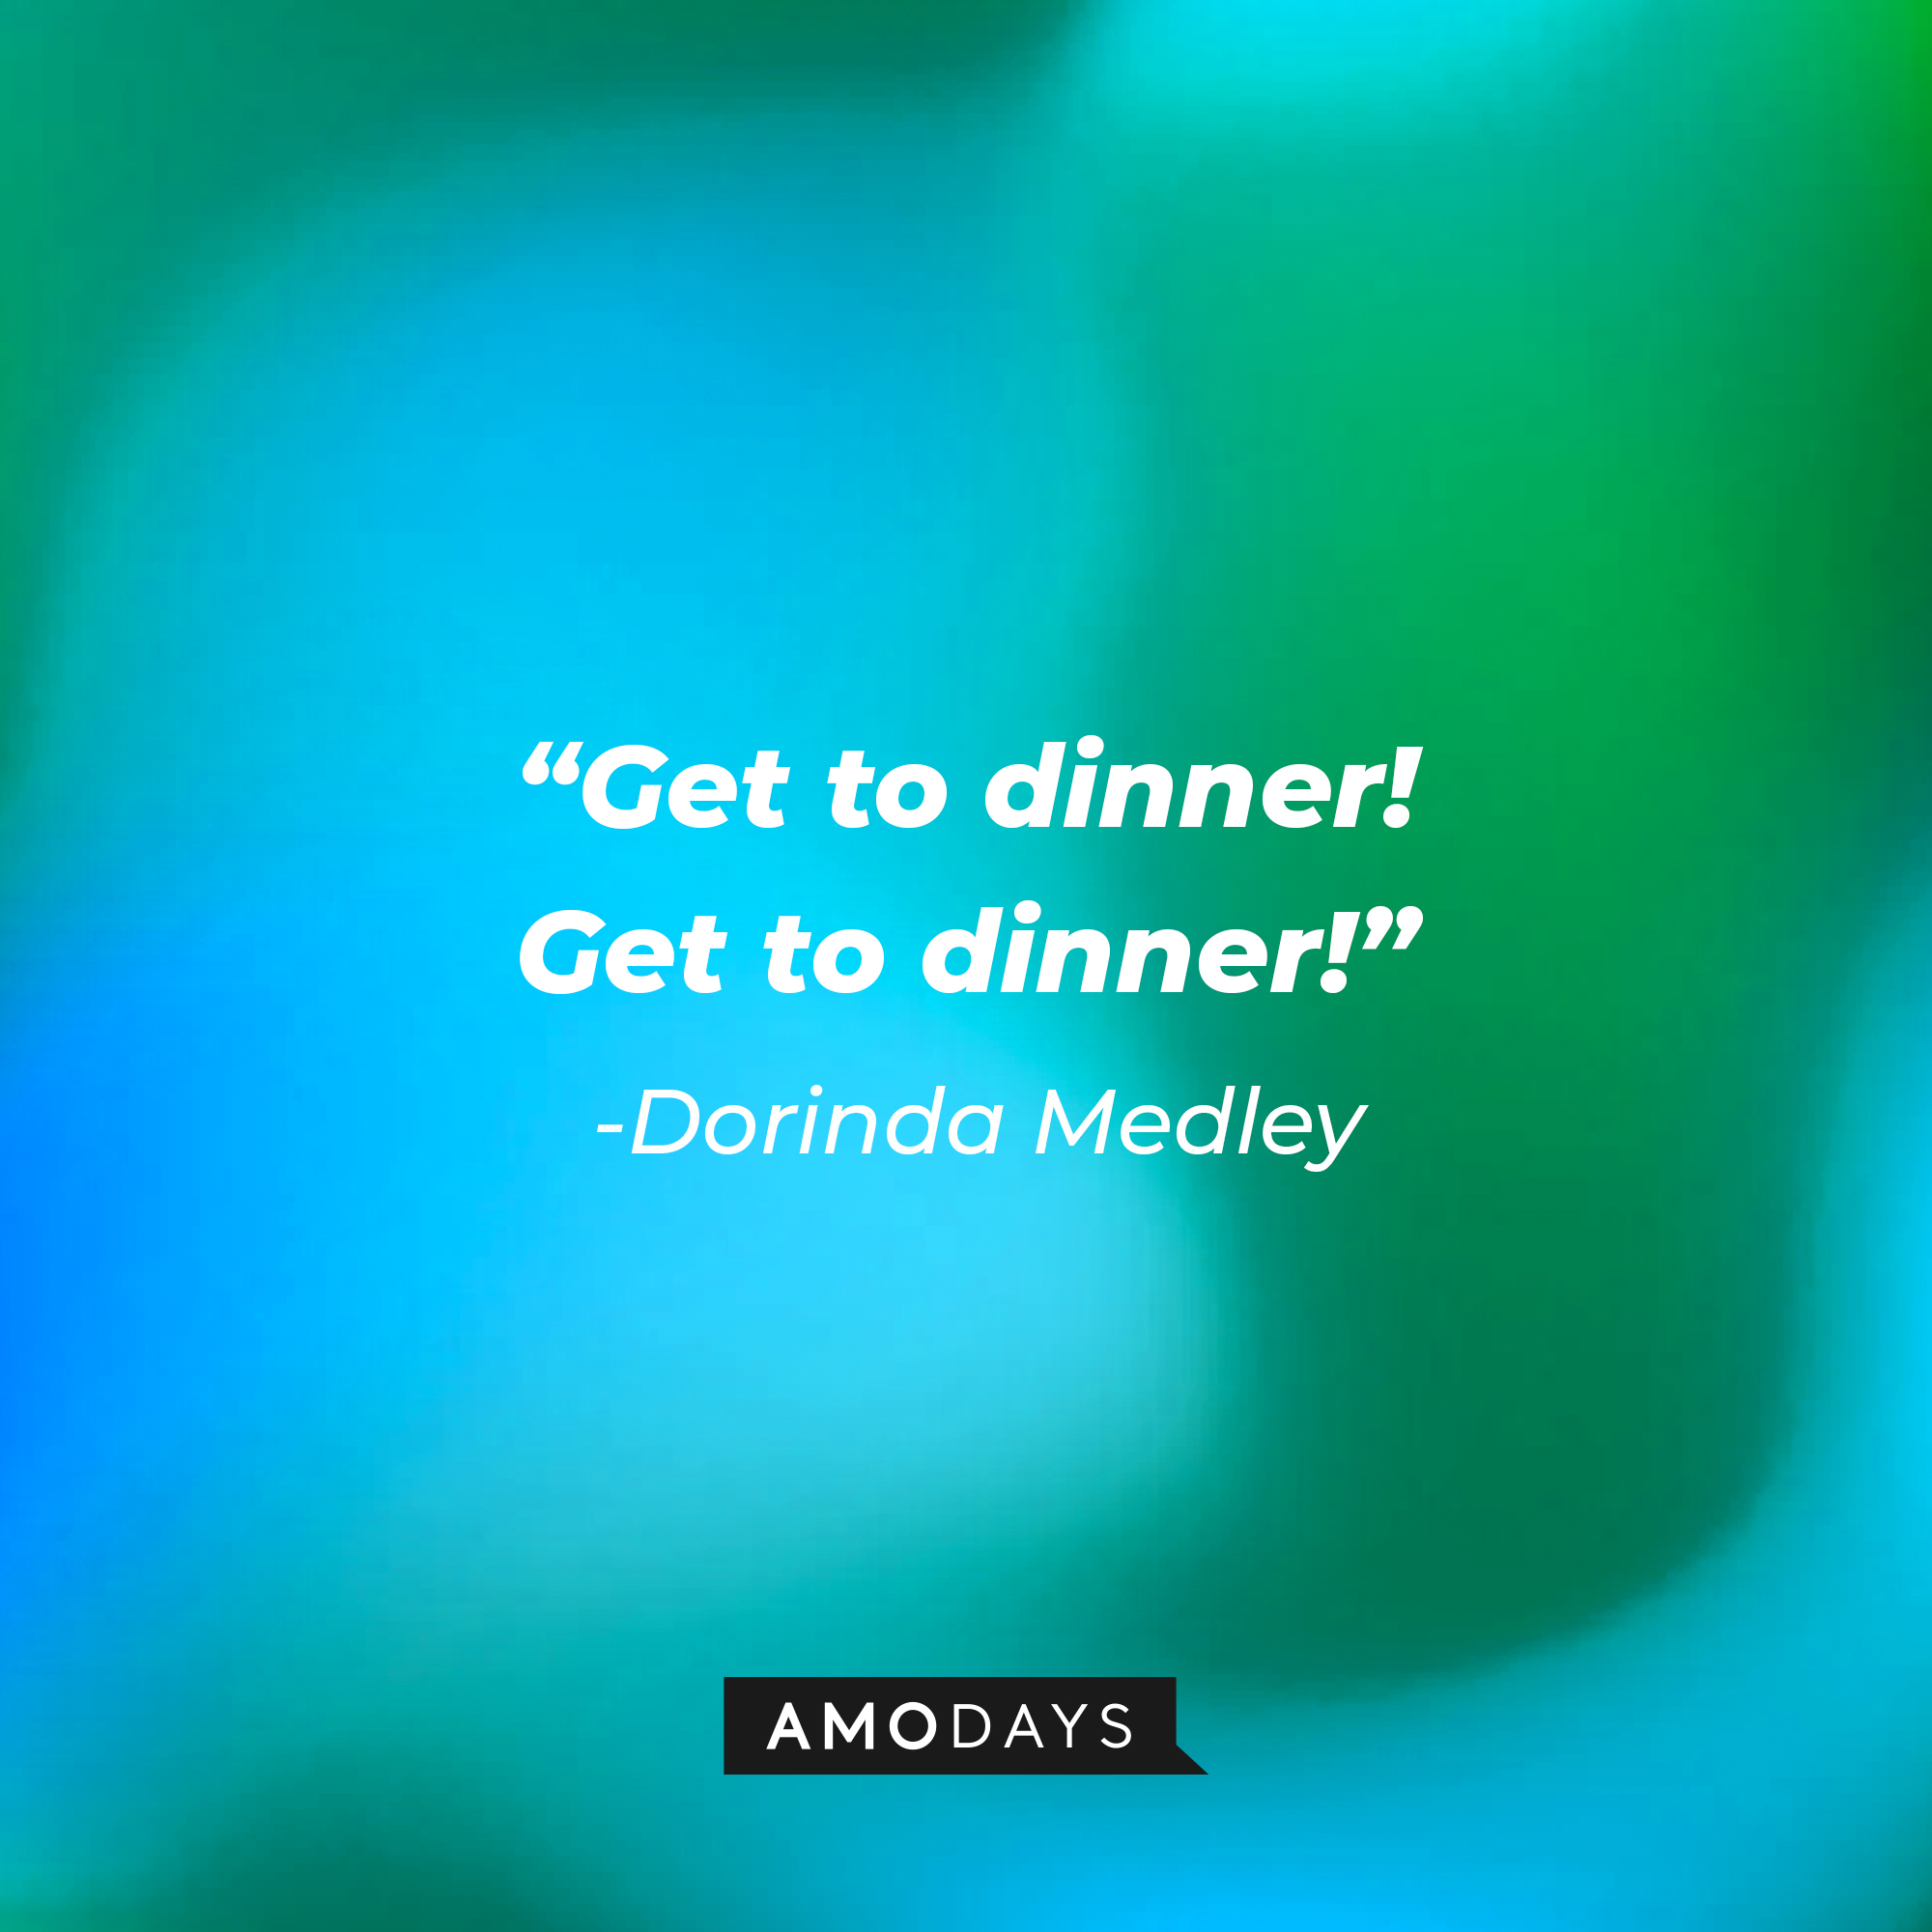 Dorinda Medley’s quote: "Get to dinner! Get to dinner! | Source: AmoDays